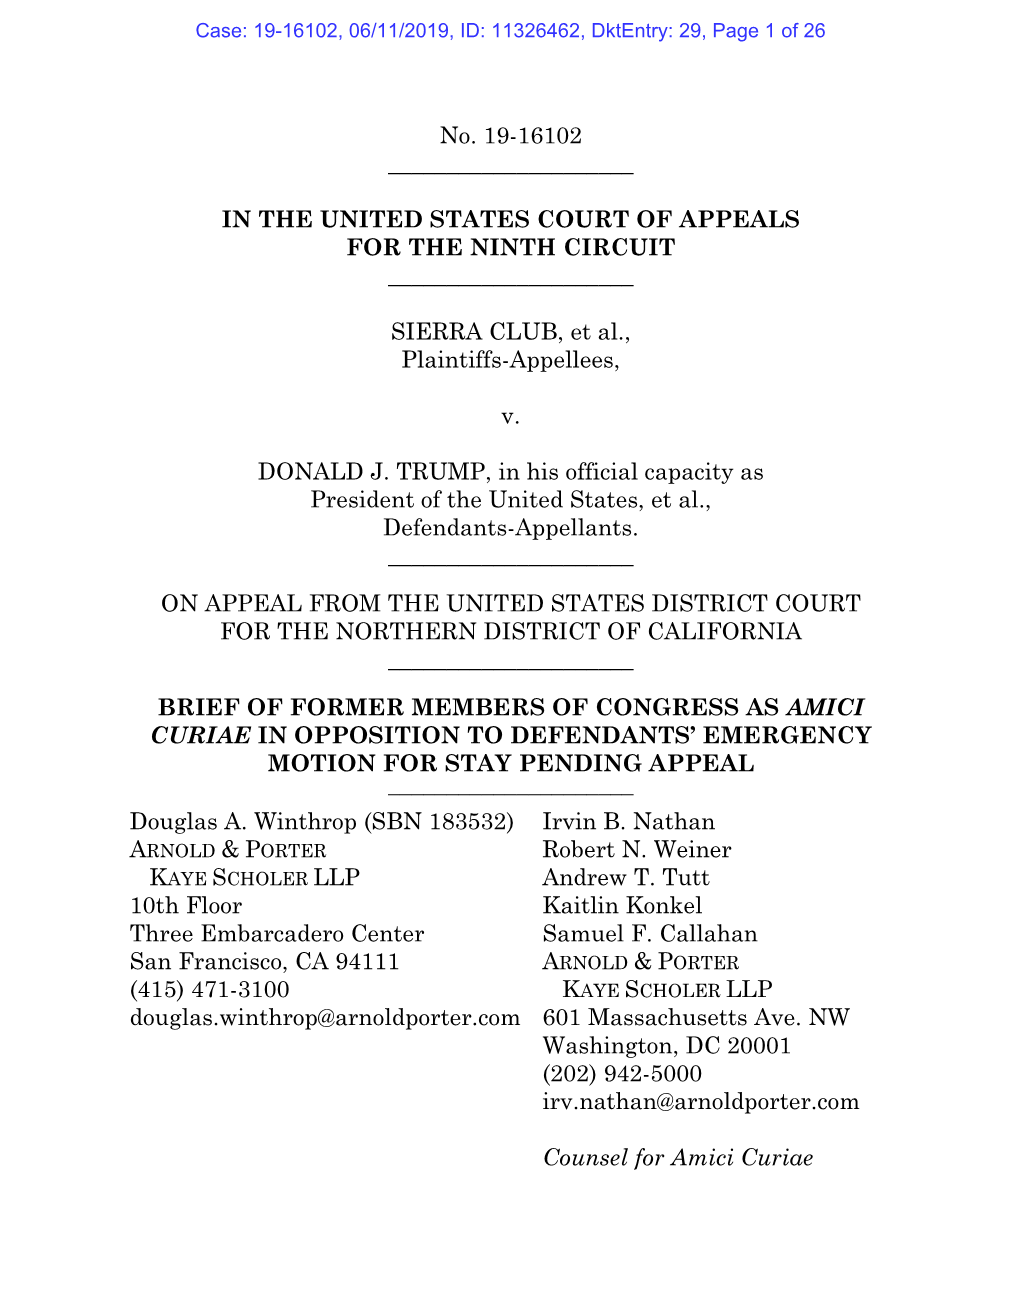 Amicus Brief Opposing Stay